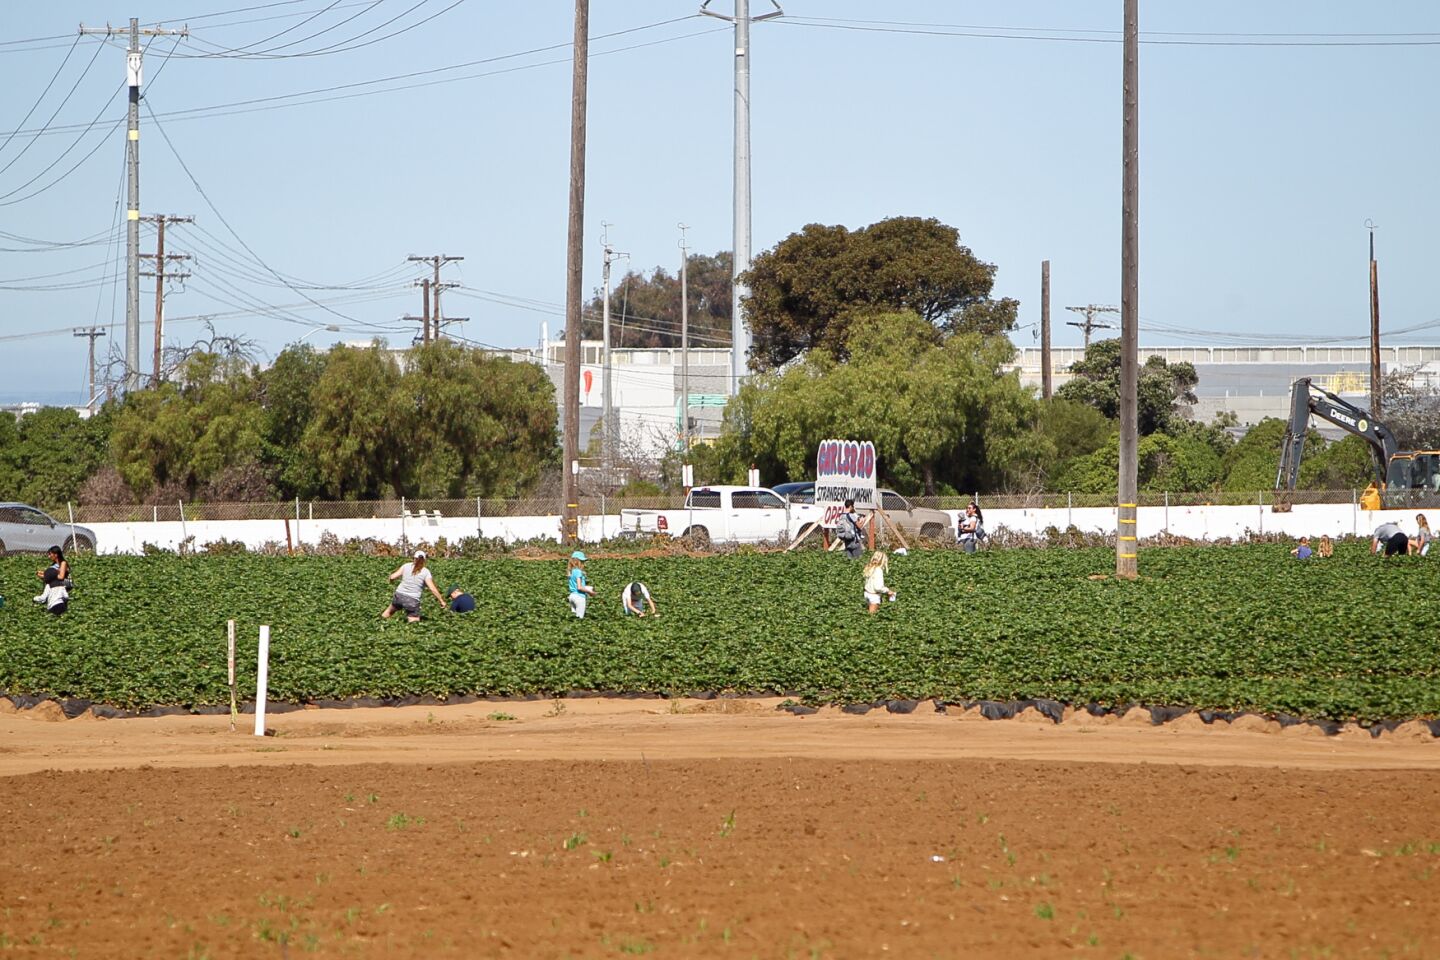 Families enjoy picking strawberries together at the Carlsbad Strawberry Company